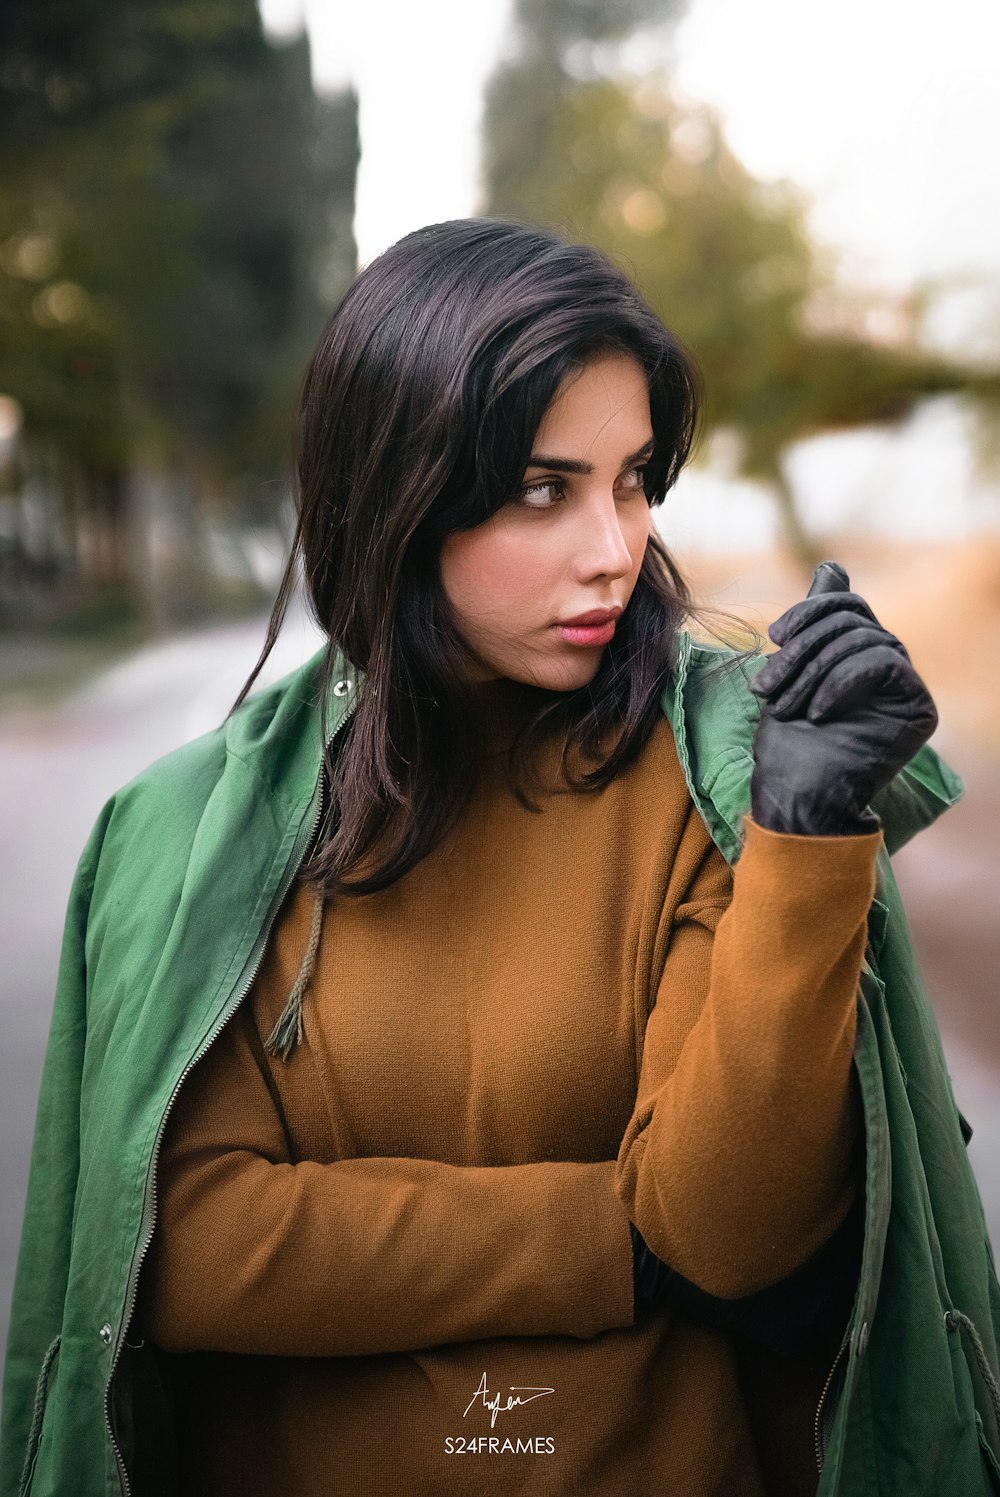 a woman wearing a green jacket and black gloves